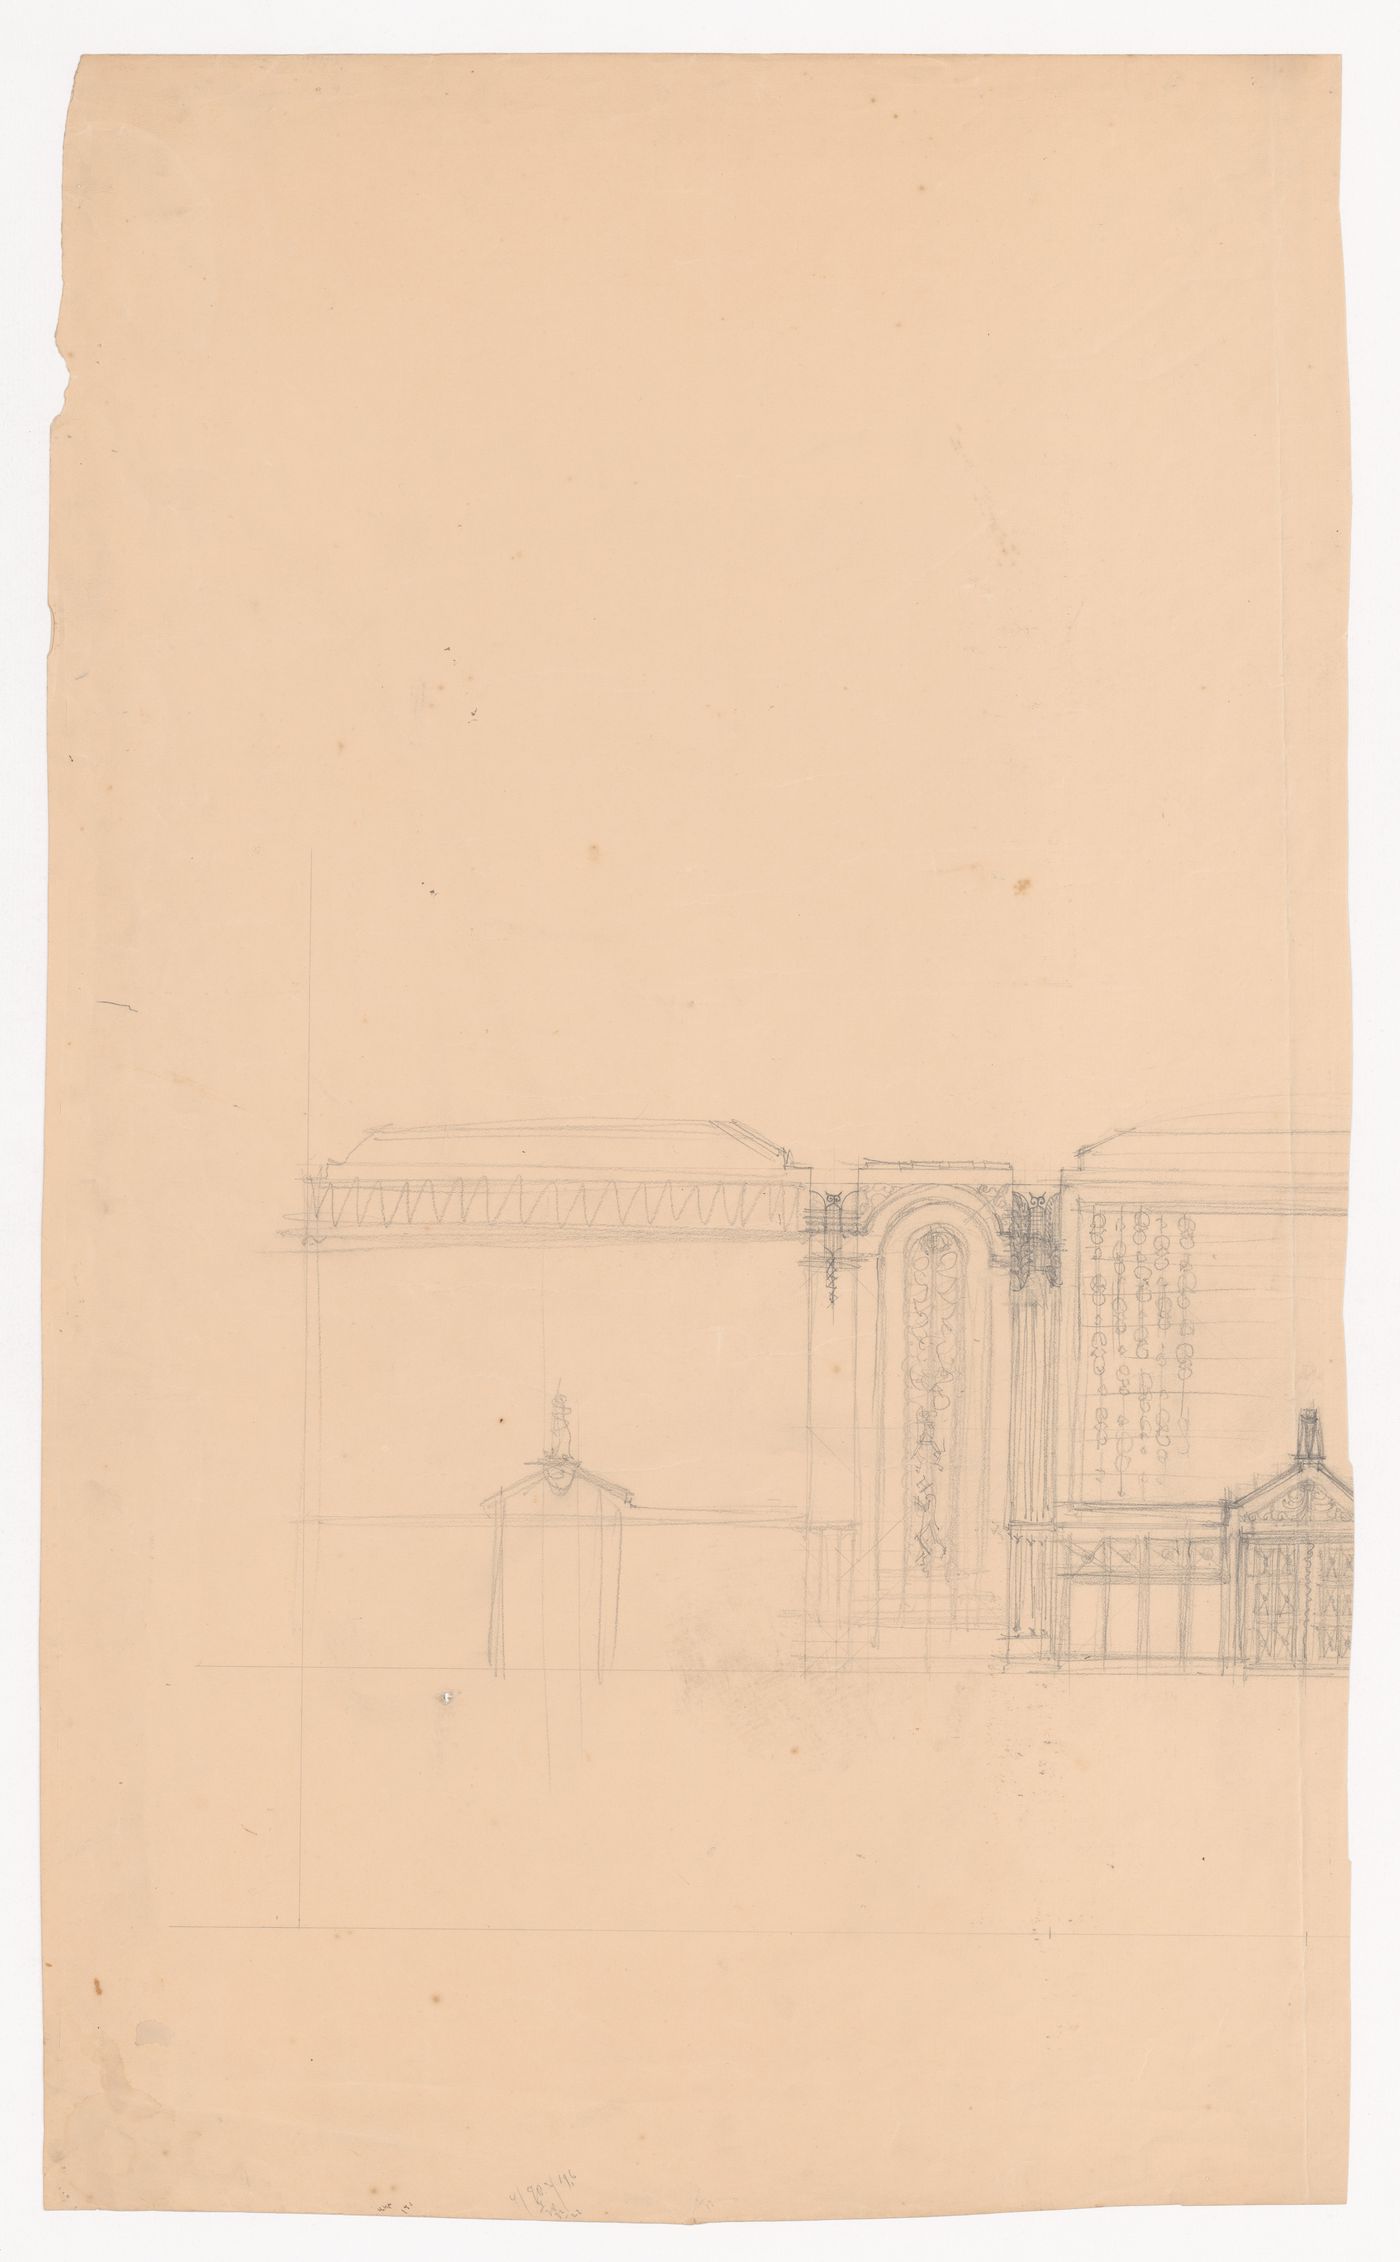 Sketch elevation, probably for an arcade for the reconstruction of the Hofplein (city centre), Rotterdam, Netherlands